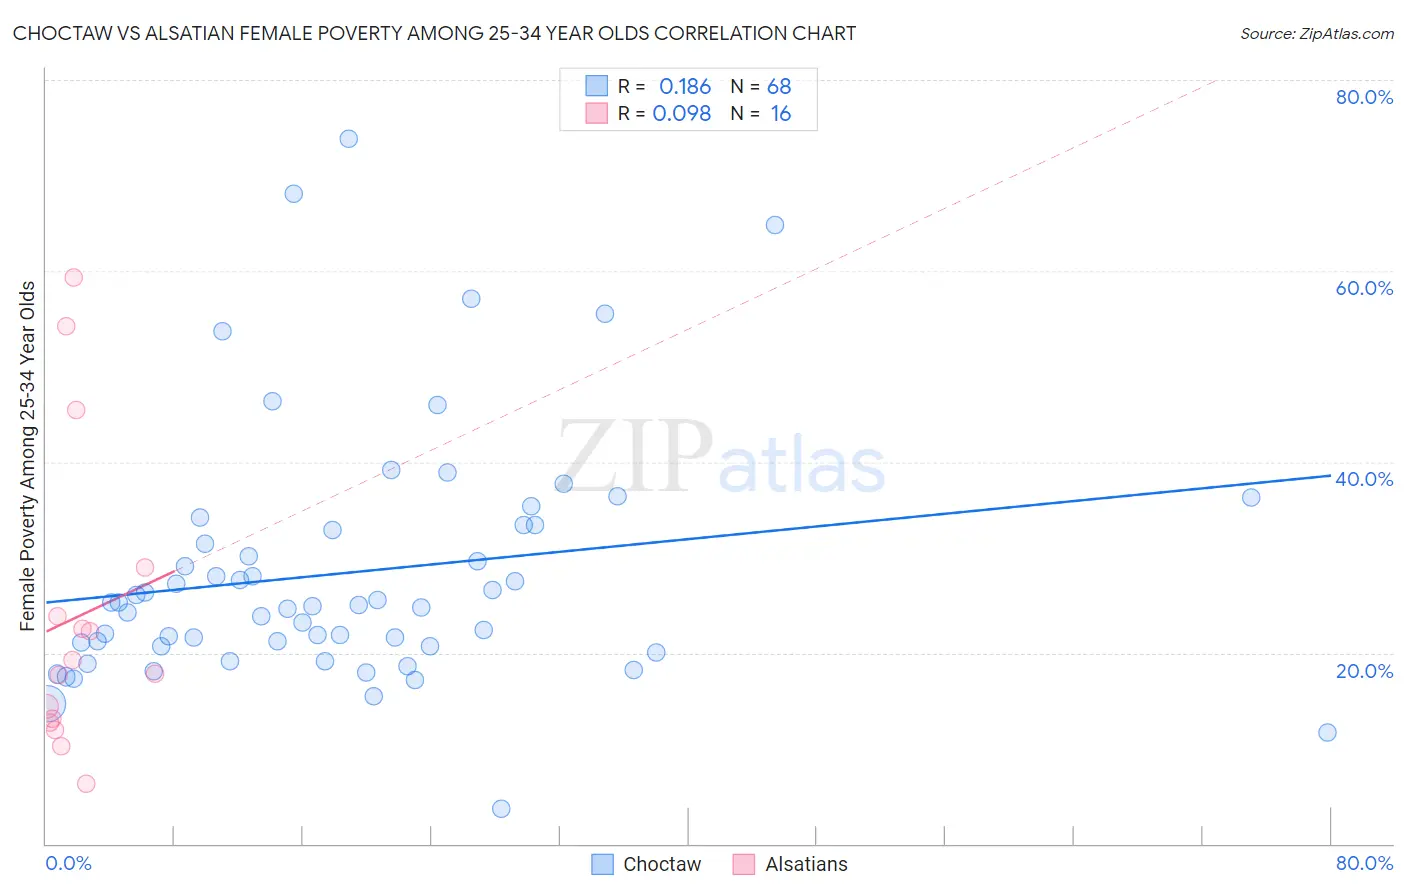 Choctaw vs Alsatian Female Poverty Among 25-34 Year Olds